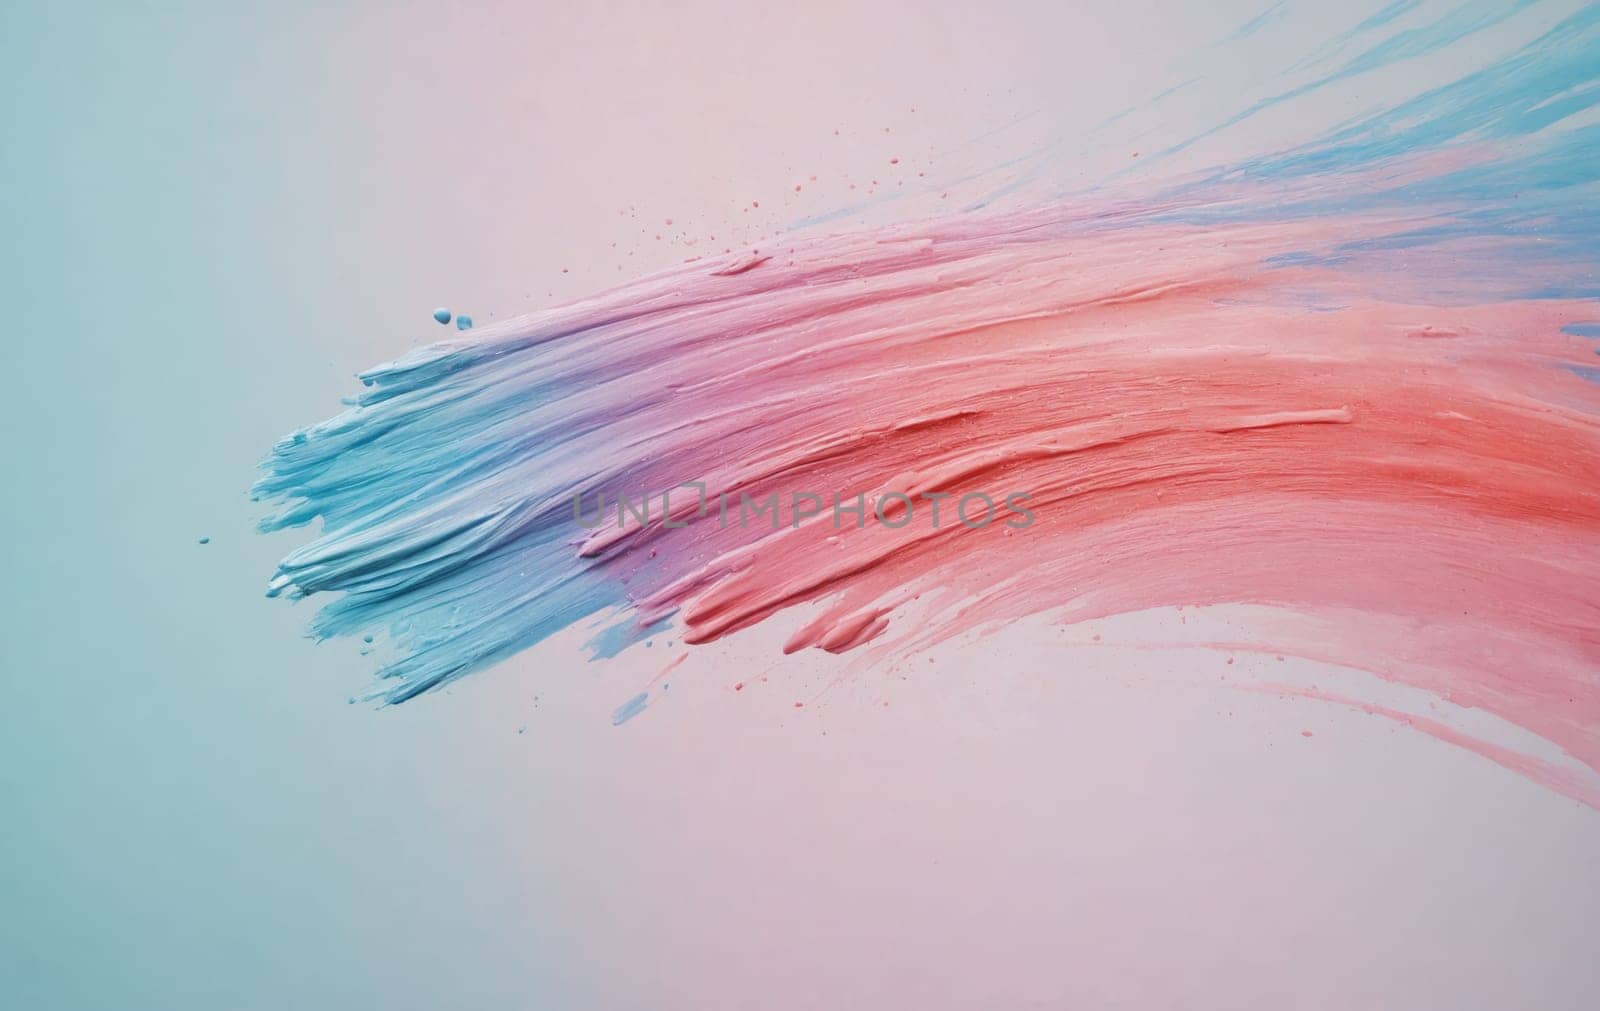 Artistic Drip Effect - Pink, Turquoise, and Blue Paint Streaks by Andre1ns